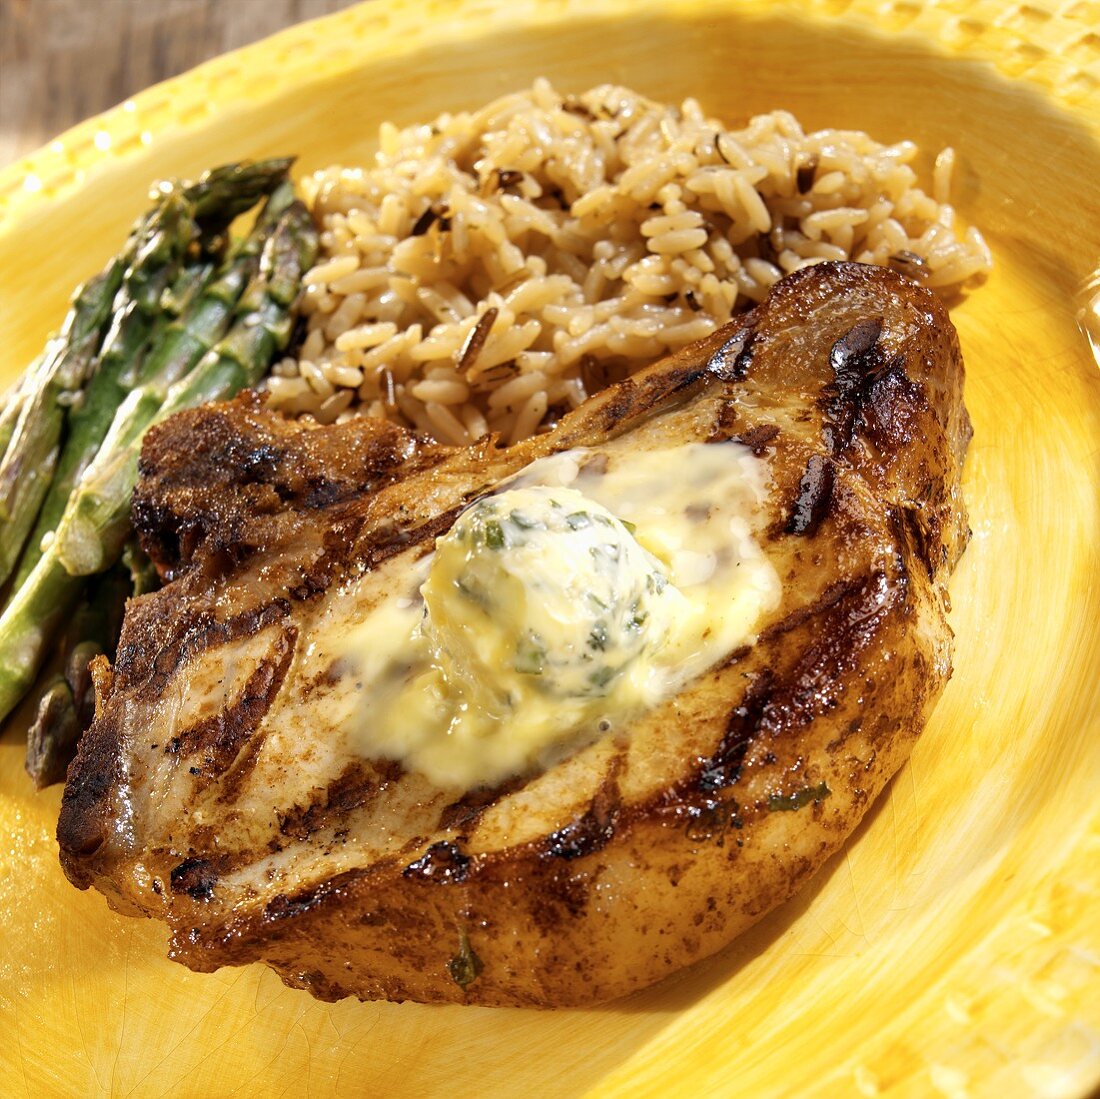 Barbecued pork chop with basil and garlic butter